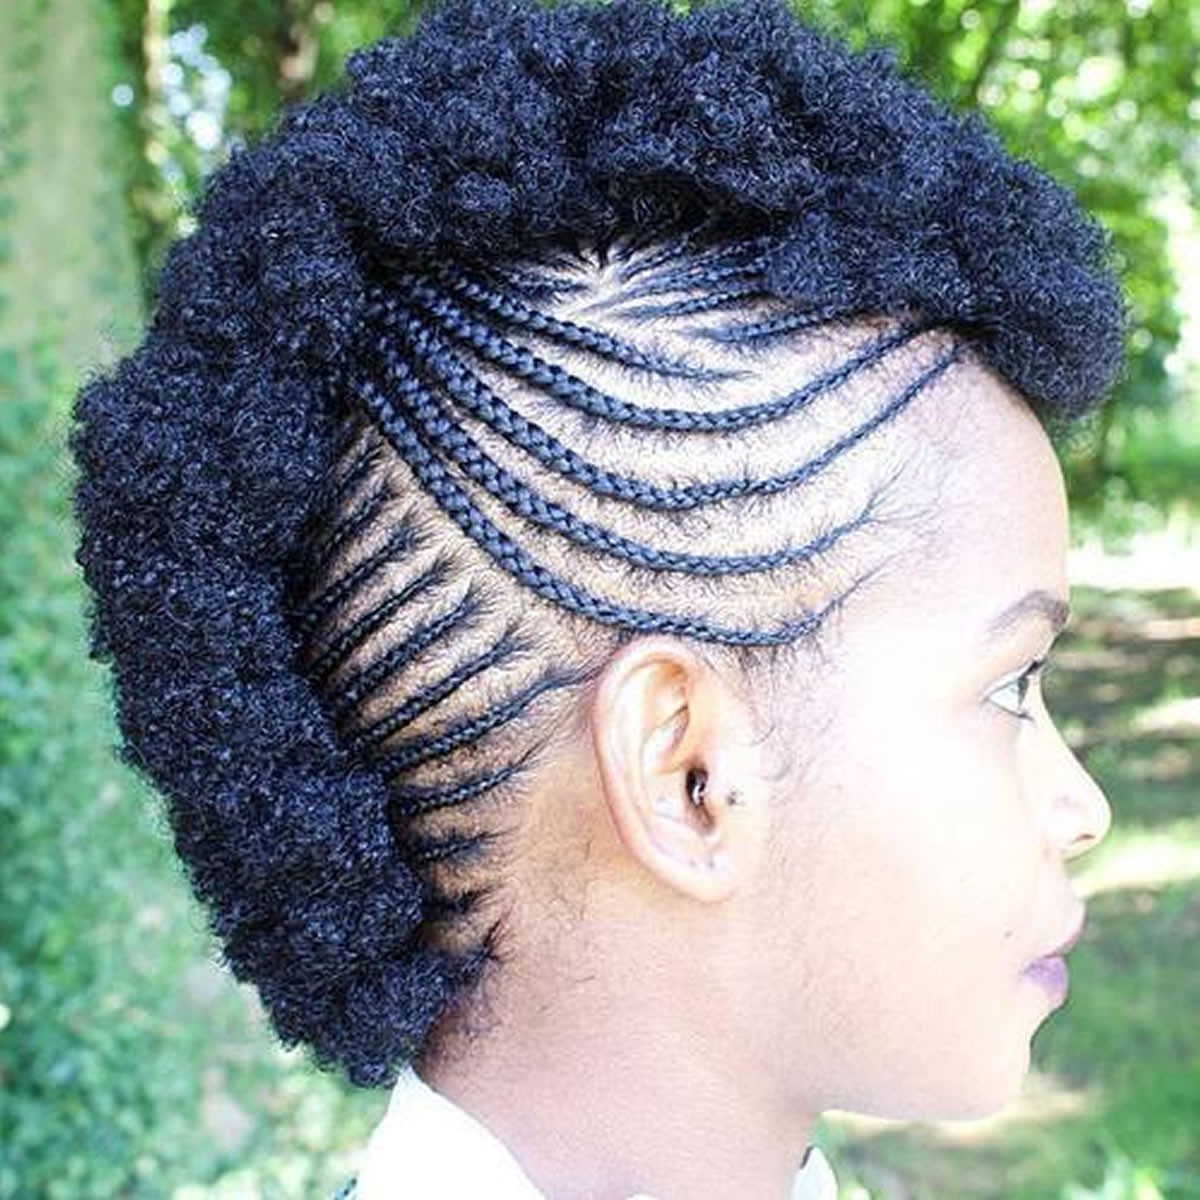 Mohawk Hairstyle For Natural Hair
 30 Glamorous Braided Mohawk Hairstyles for Girls and Women